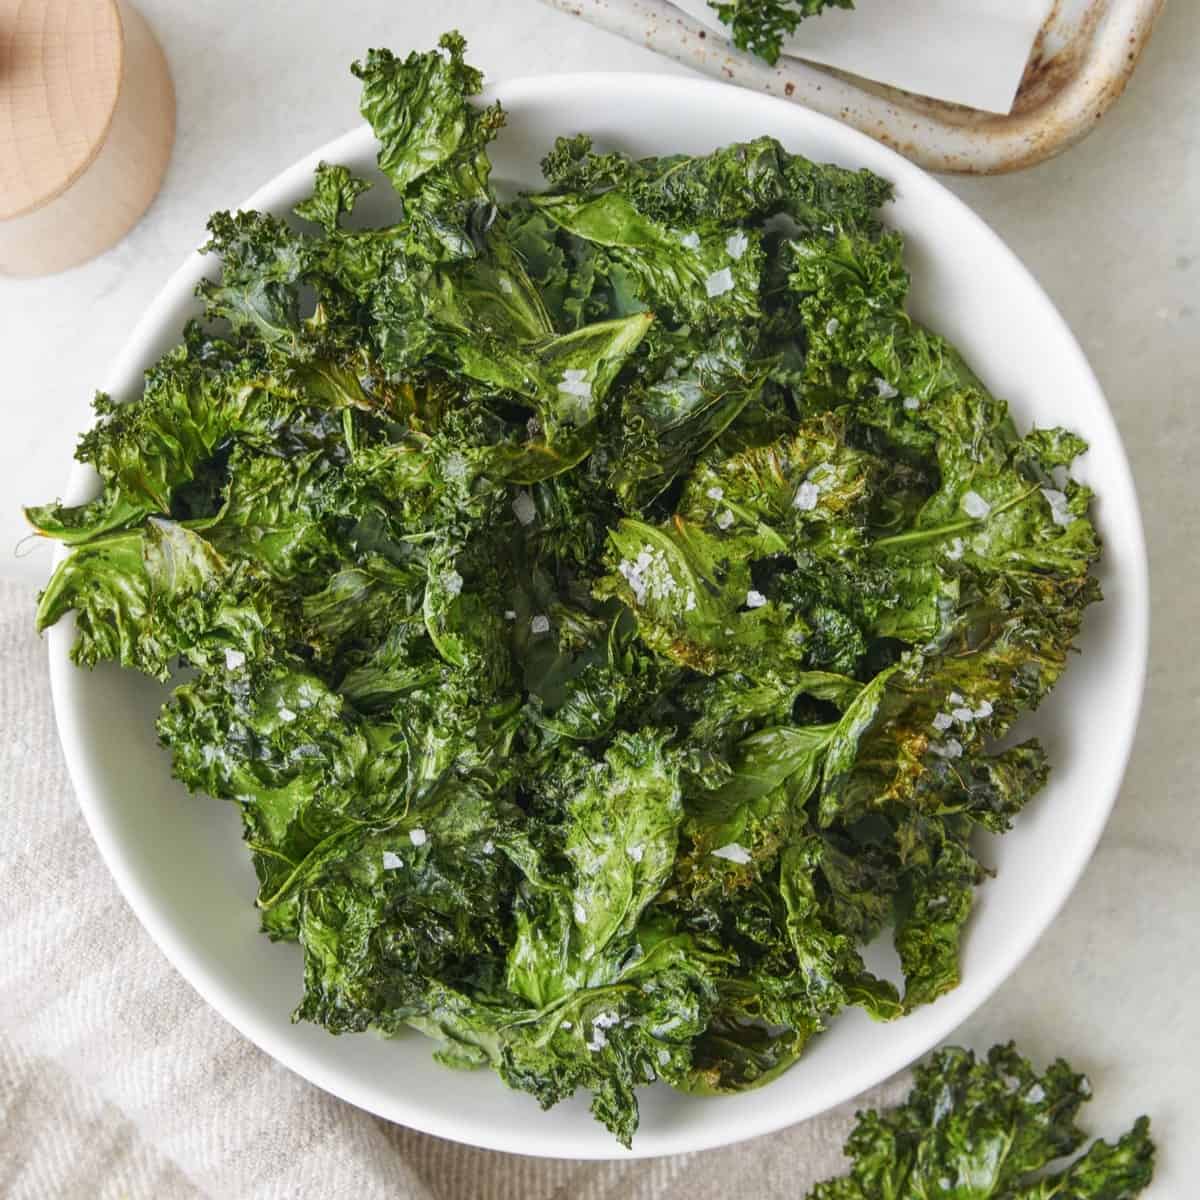 https://feelgoodfoodie.net/wp-content/uploads/2023/04/Baked-Kale-Chips-TIMG.jpg